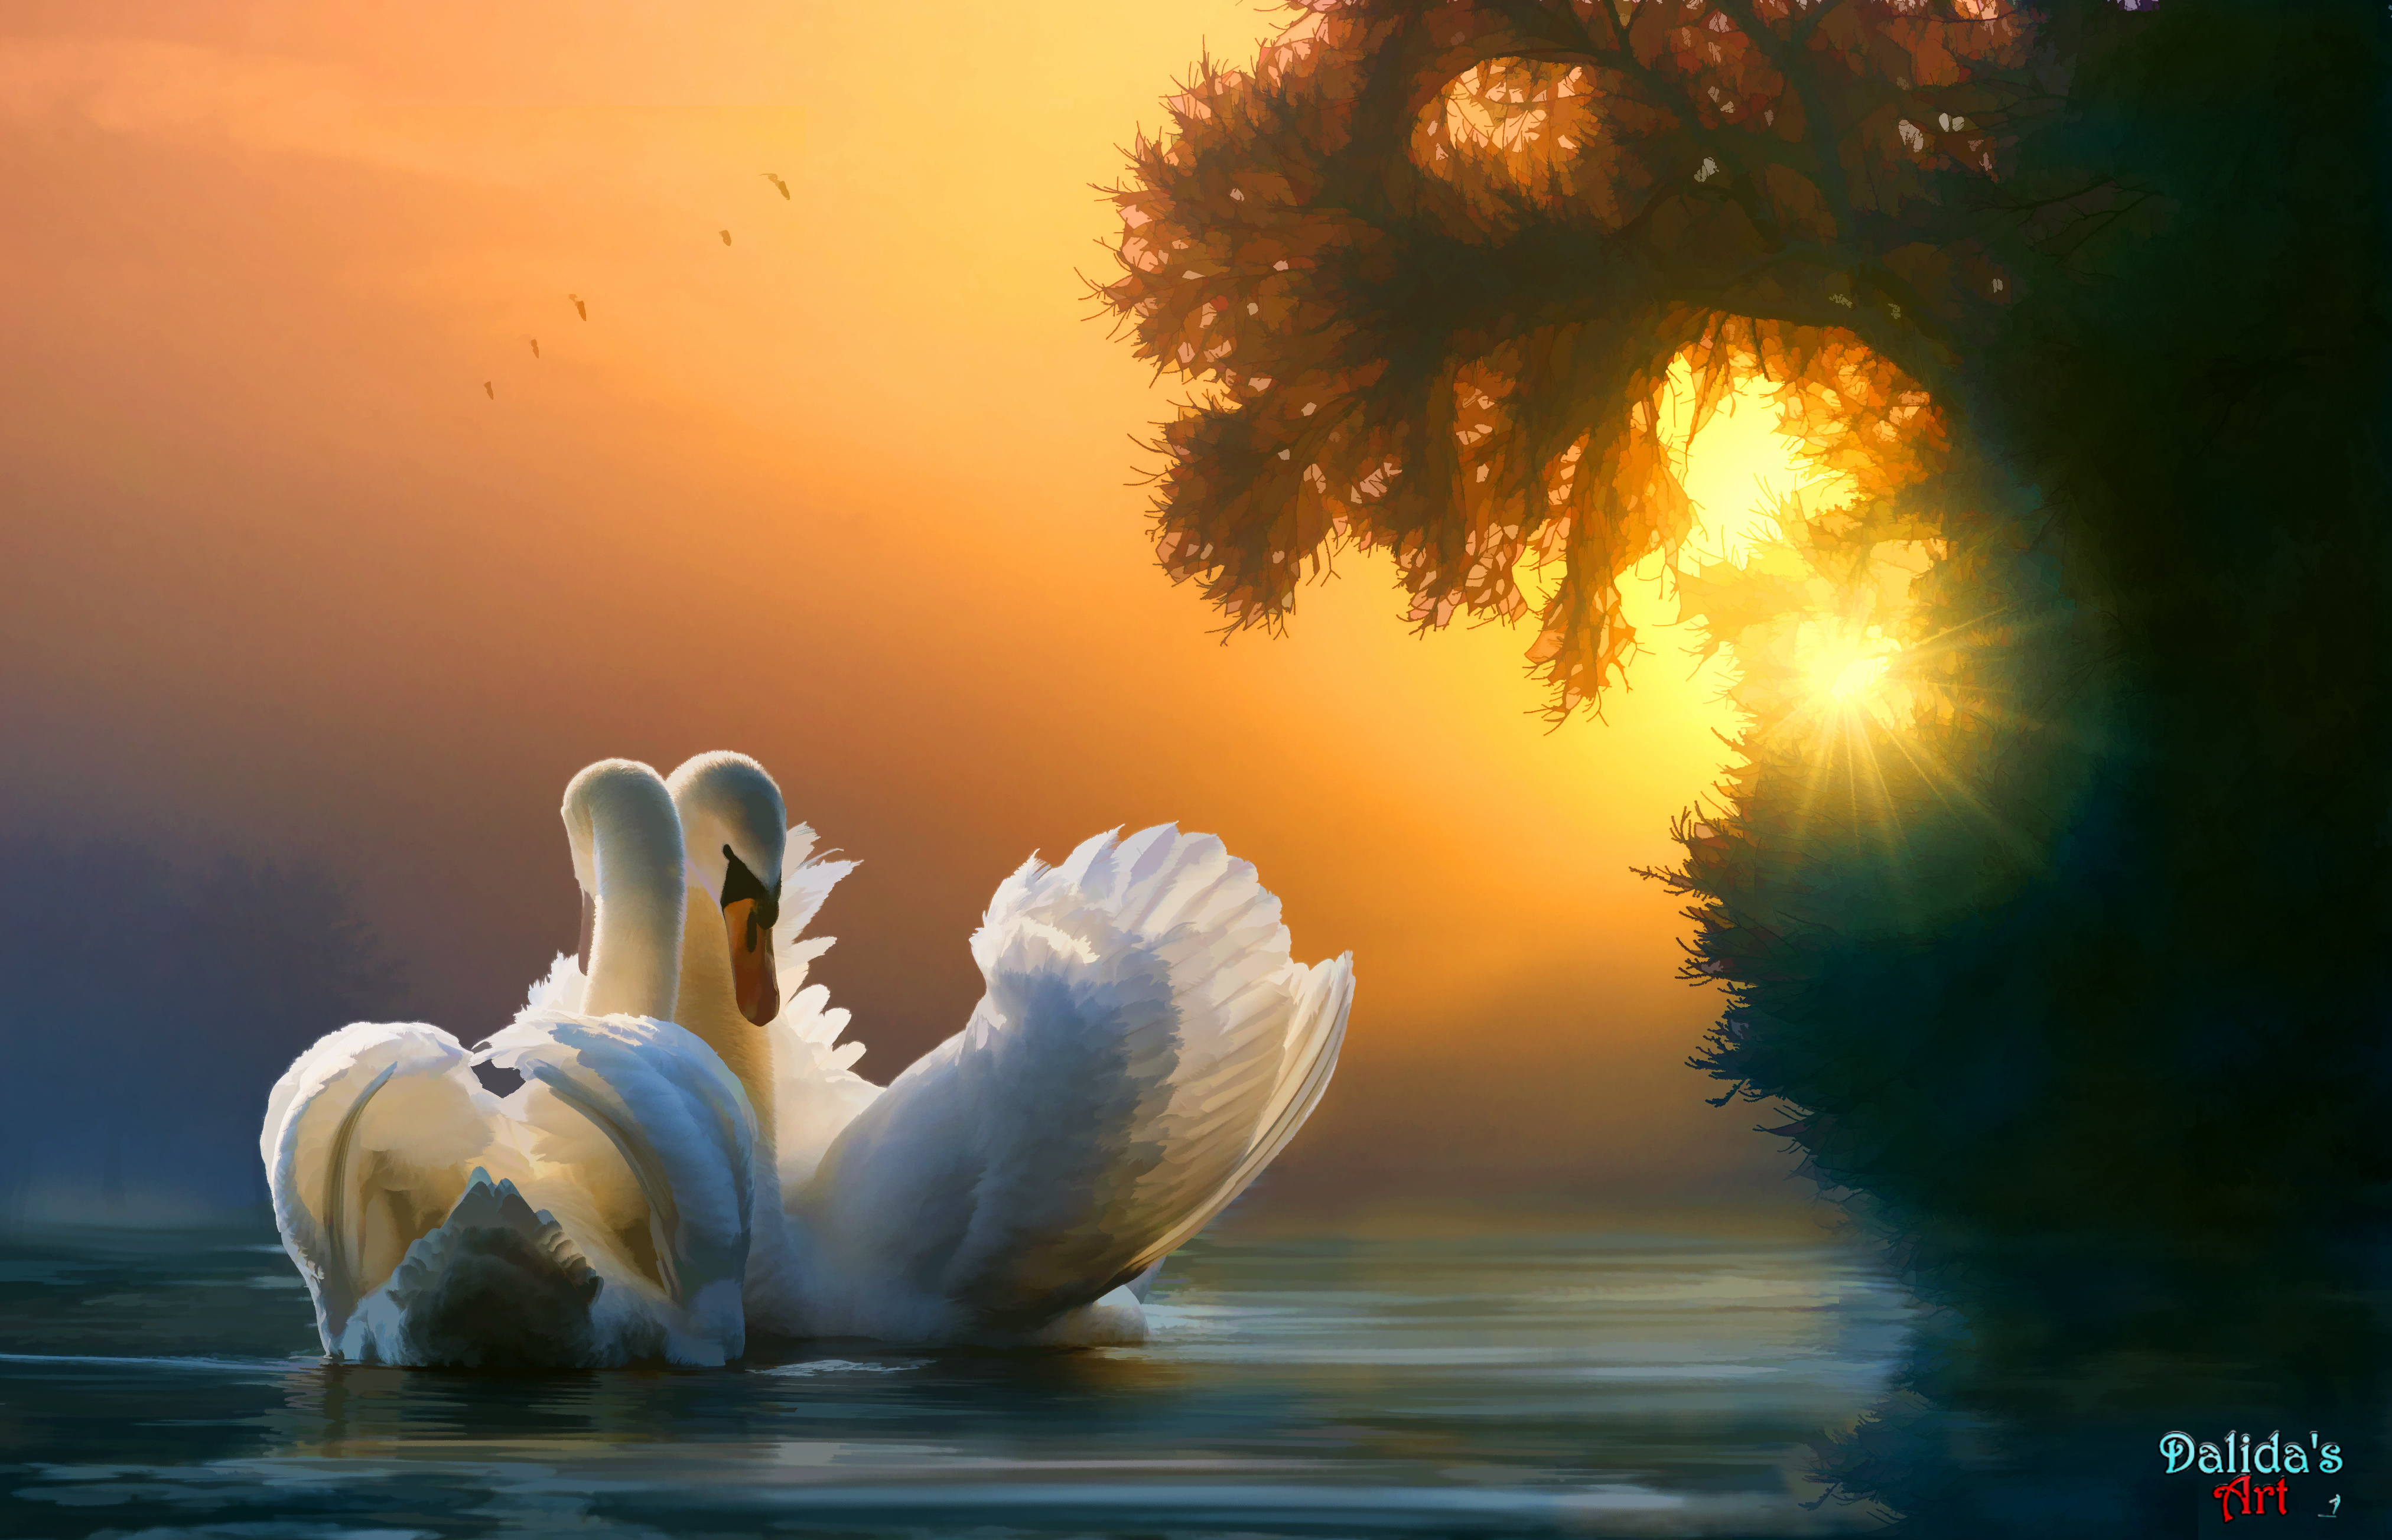 1080x1920 / 1080x1920 swan, birds, love, couple for Iphone 6, 7, 8 wallpaper  - Coolwallpapers.me!